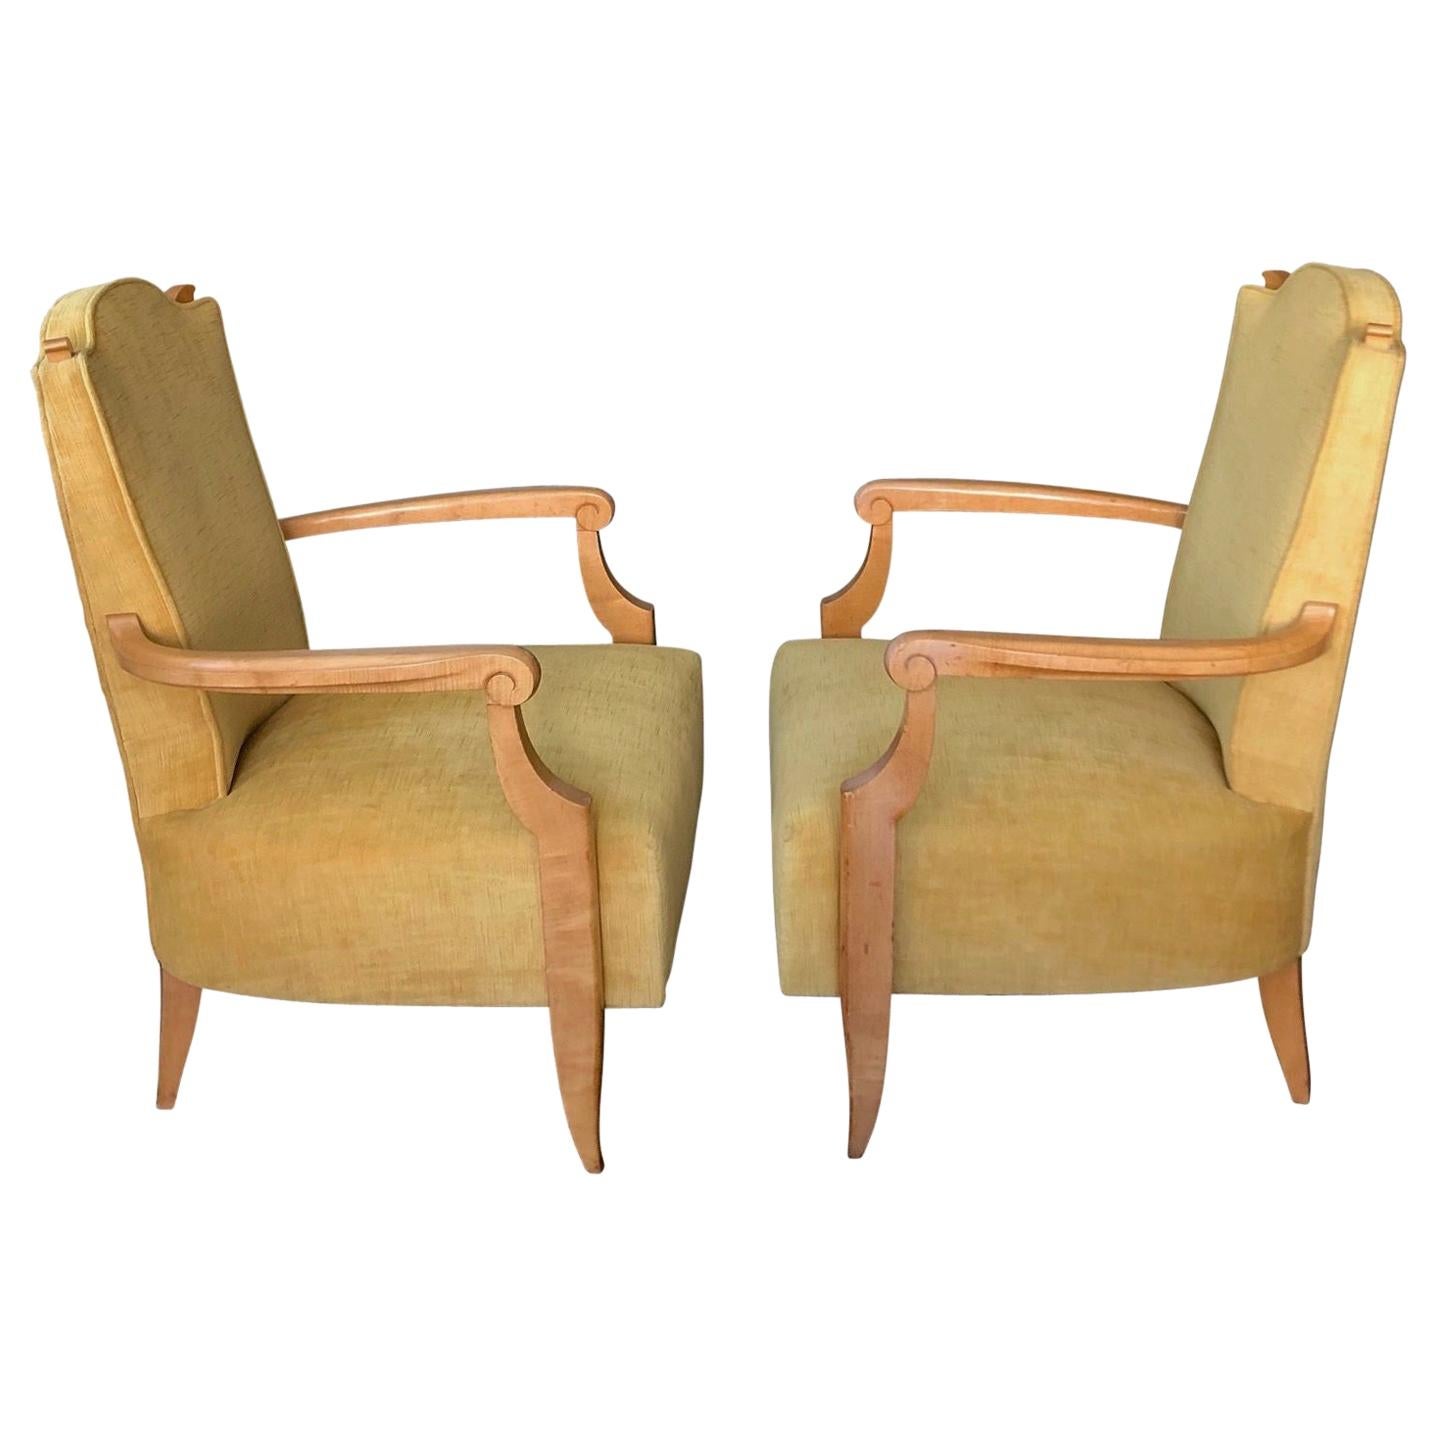 Pair of 1940's French Neoclassical Sycamore and Gold Yellow Velvet Armchairs